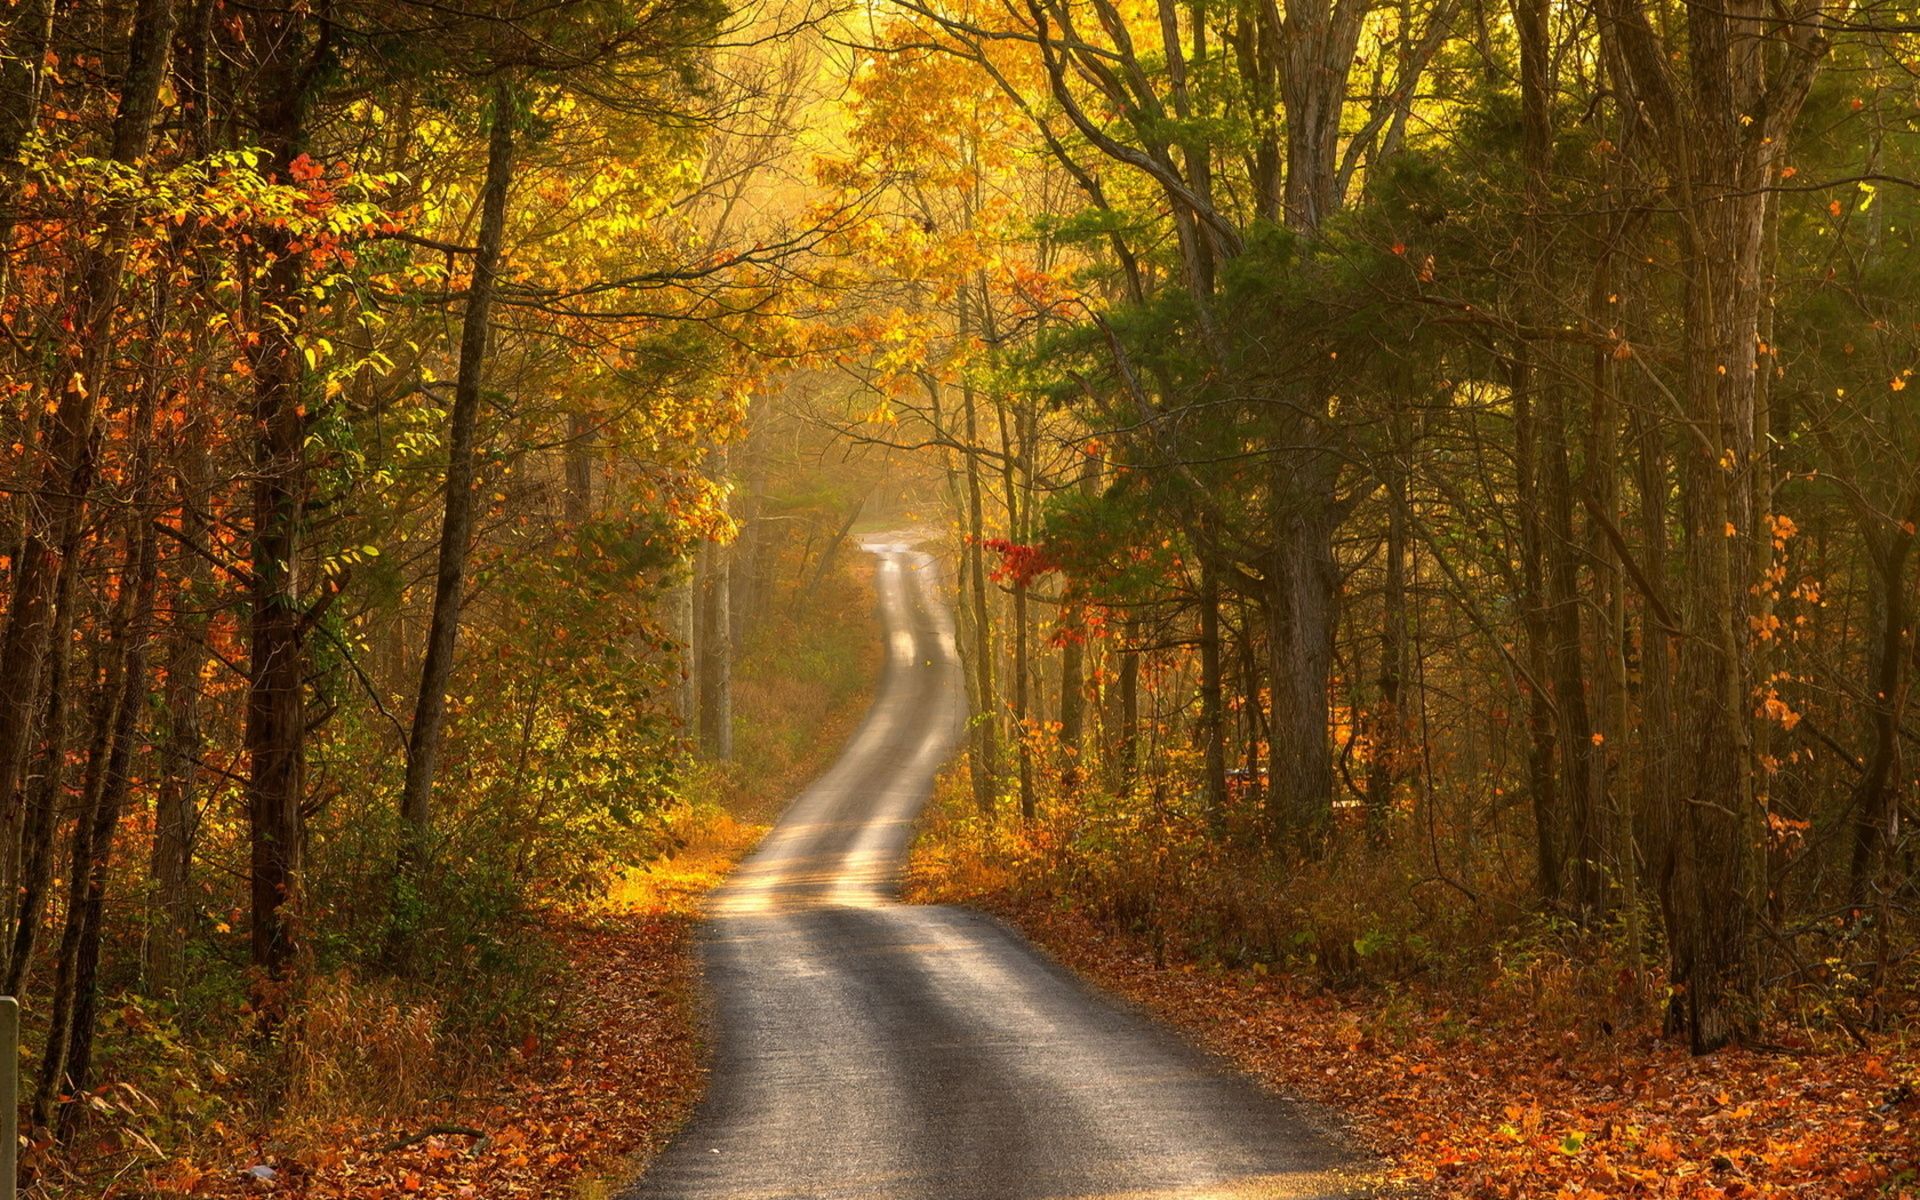 Nature landscapes trees forests roads street path leaves fall autumn seasons color wallpaperx1200